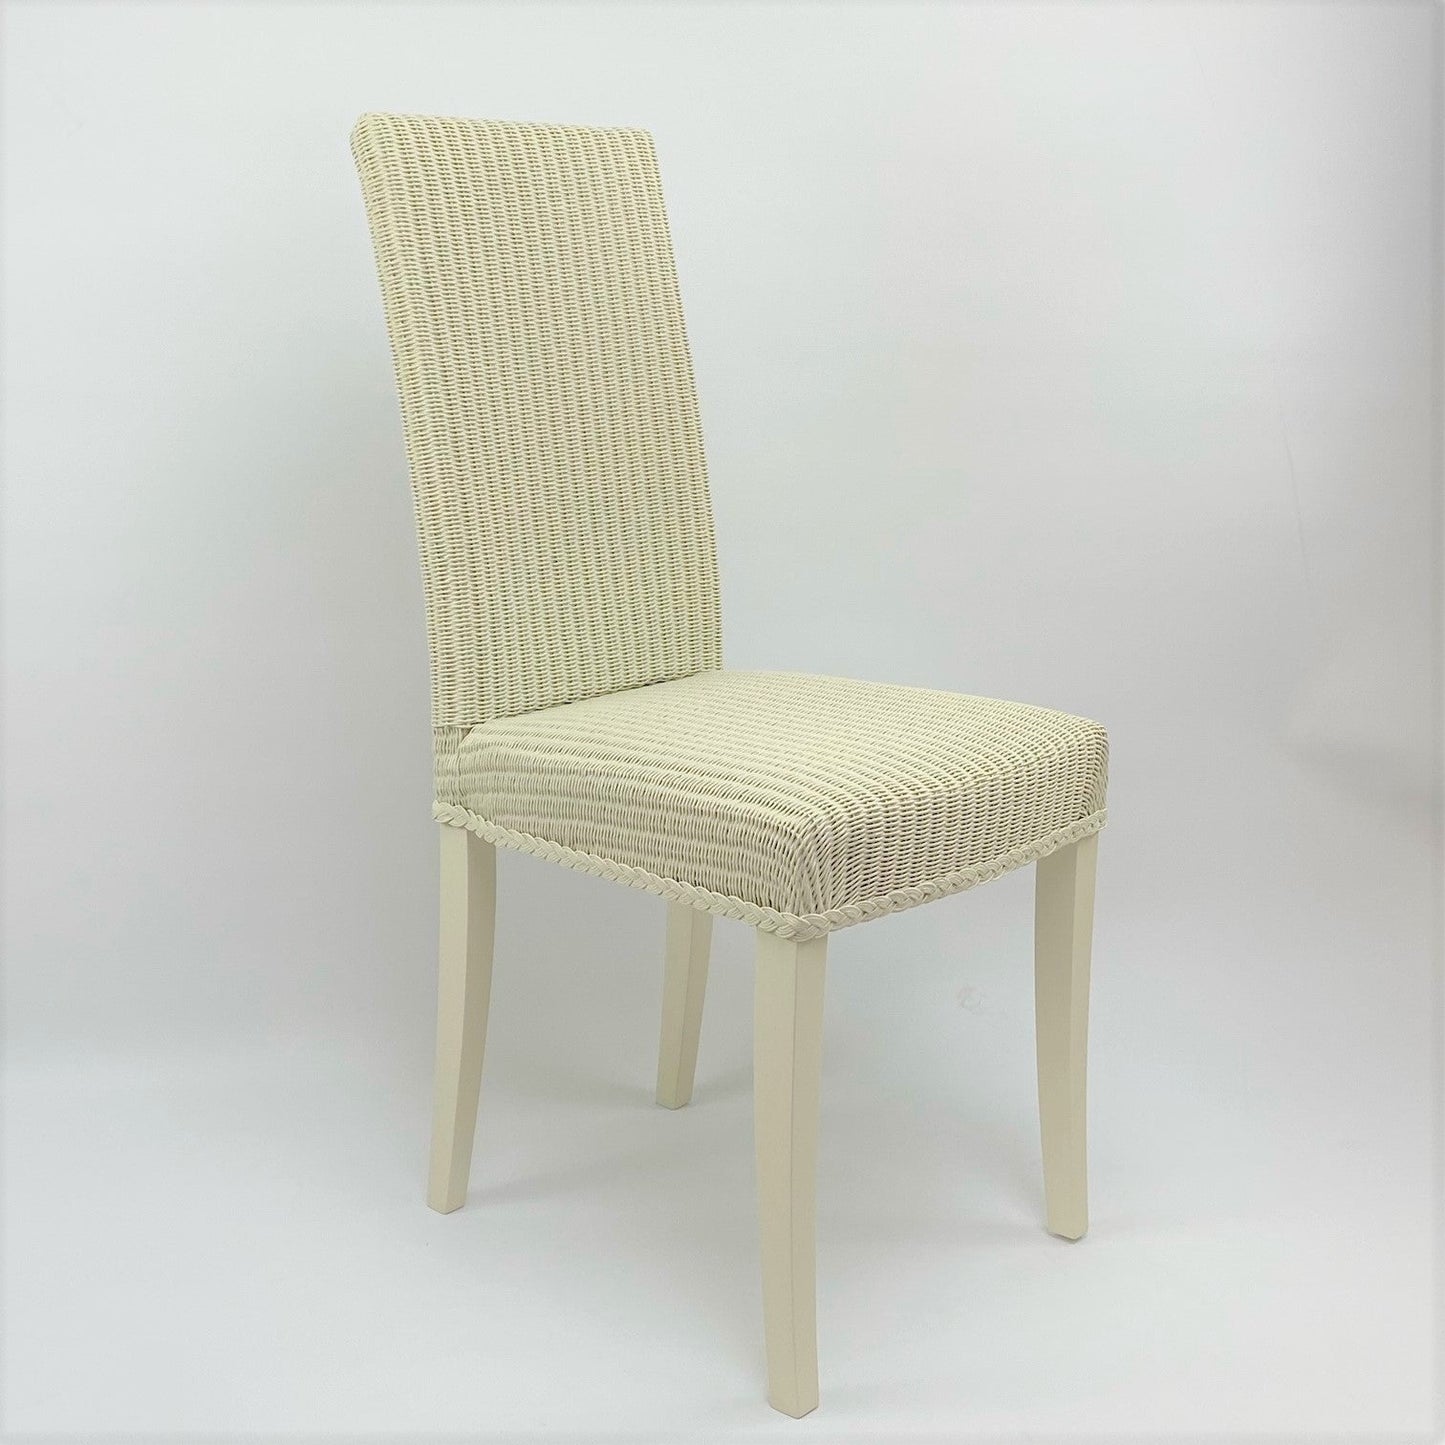 Special offer Discount - Maybourne Lloyd Loom Dining Chair - set of 4